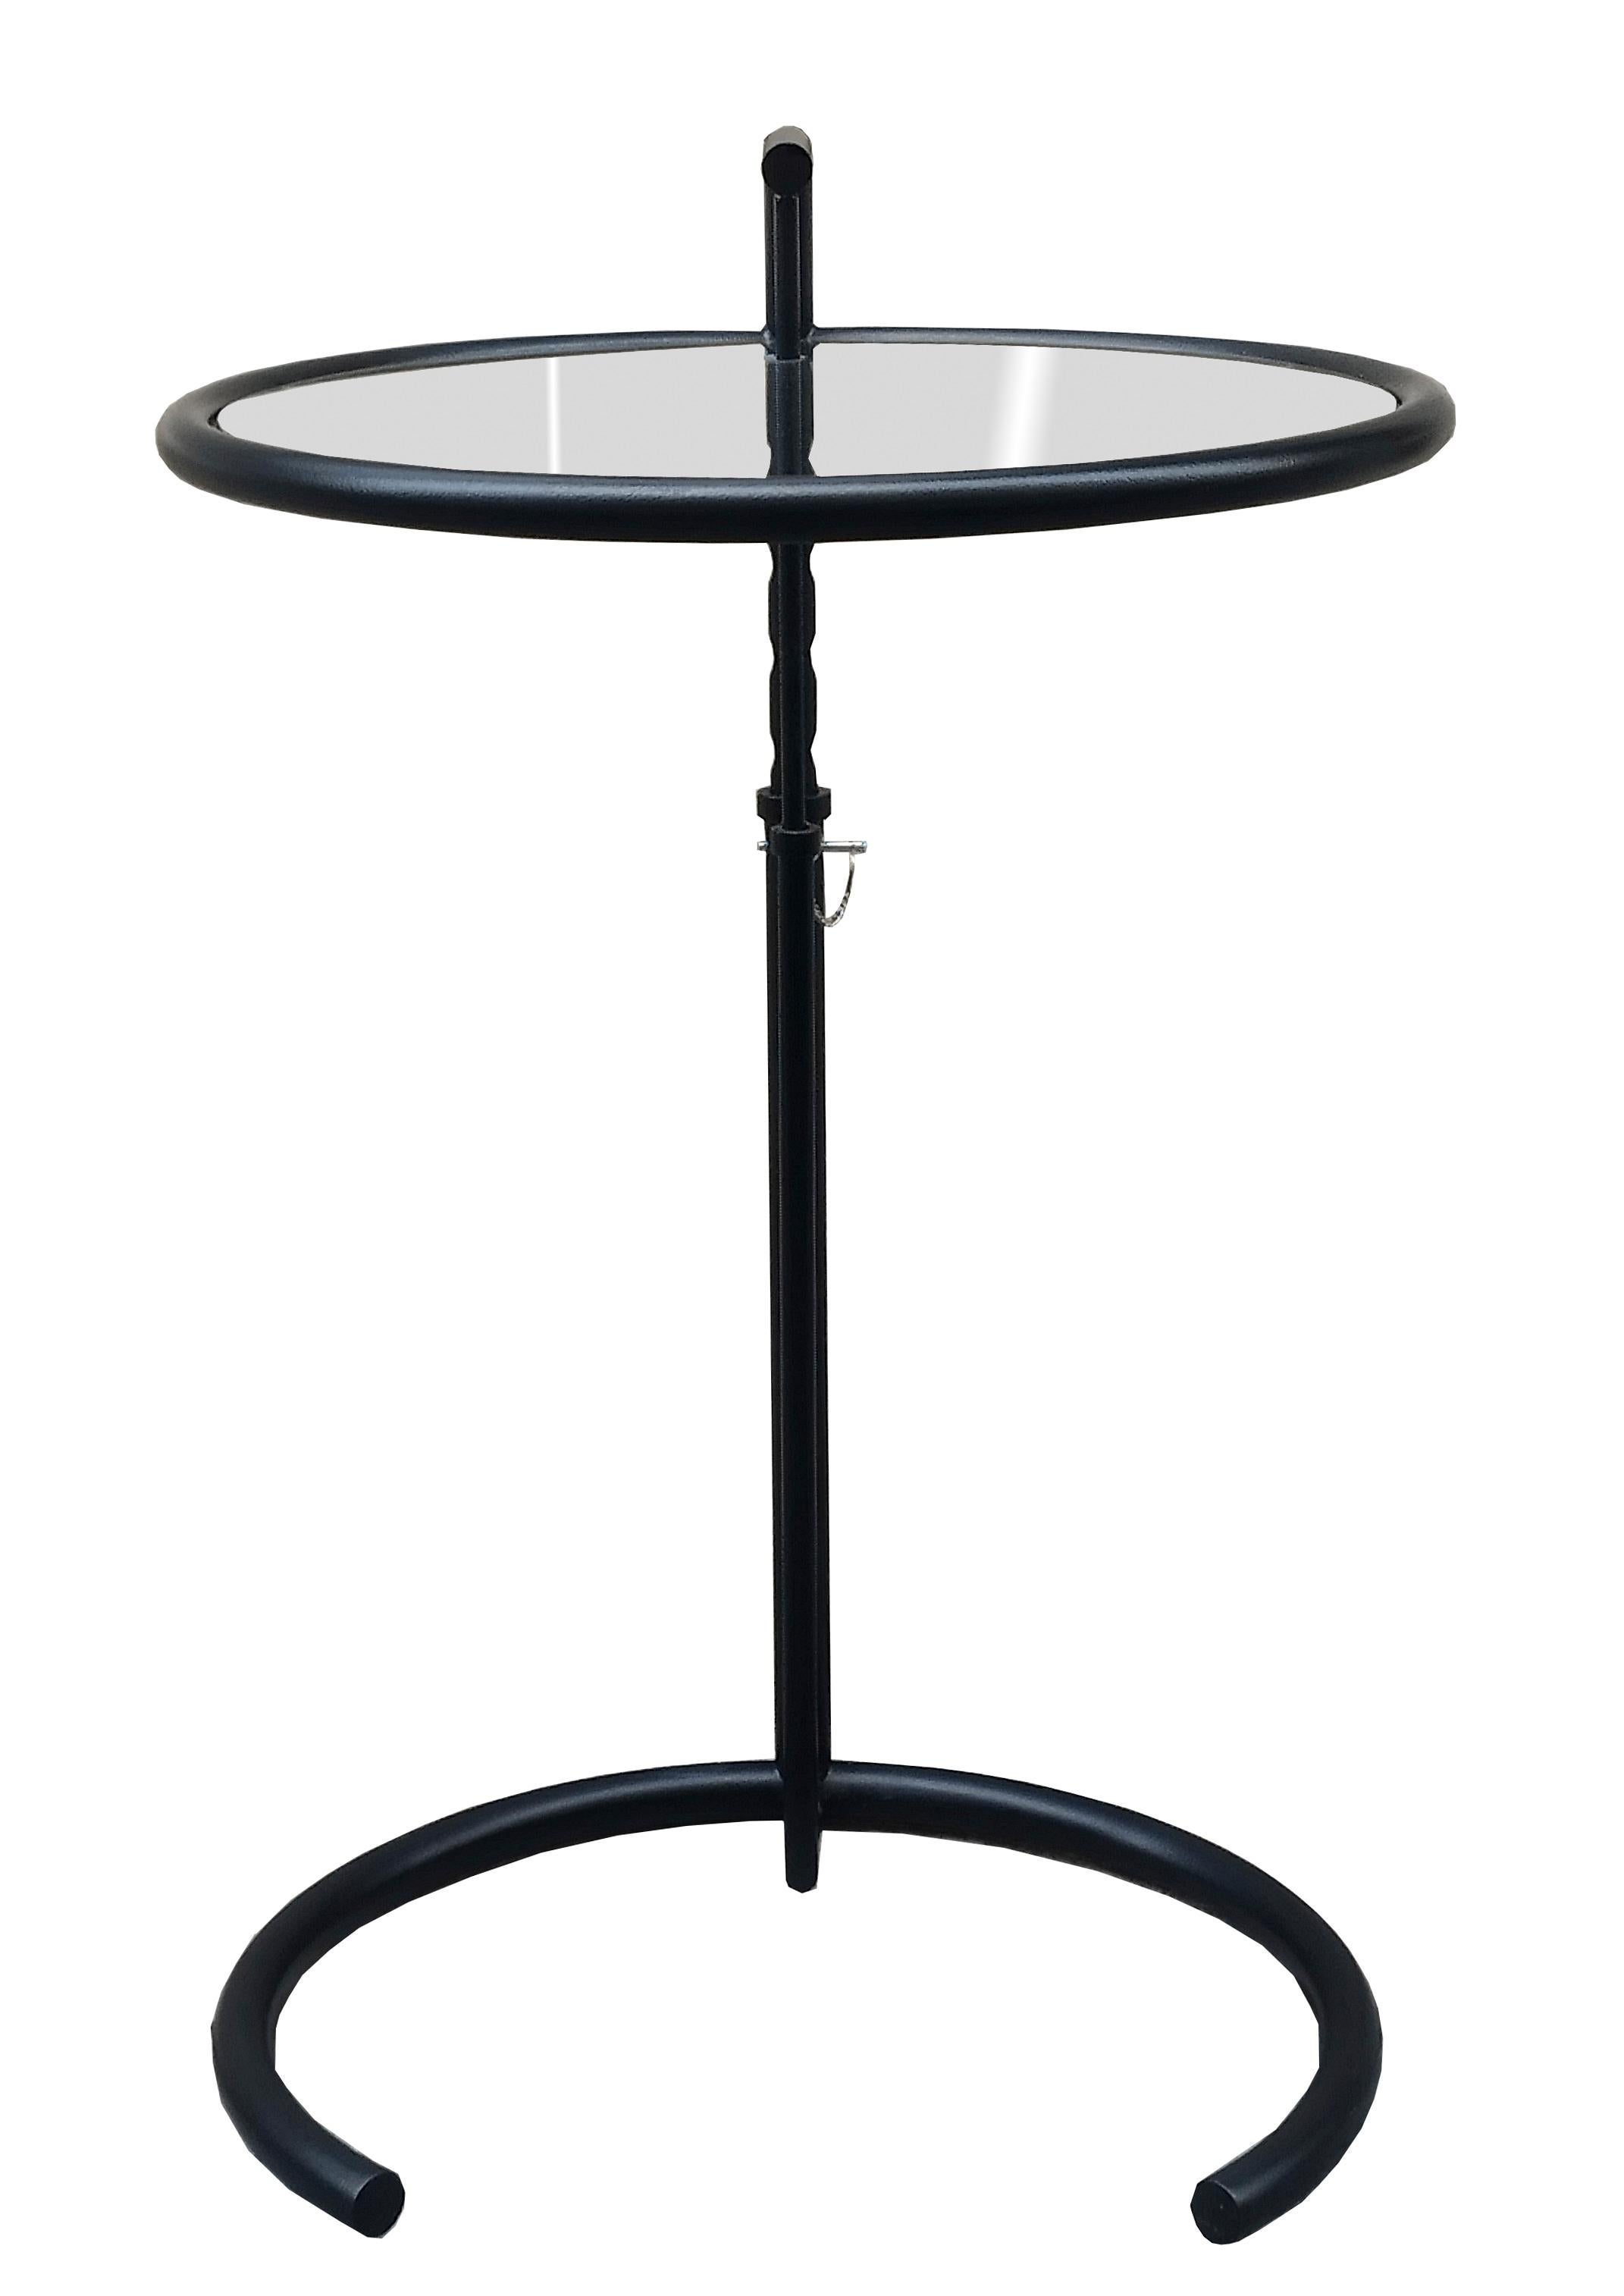 Eileen Gray E1027 black metal and smoked glass adjustable coffee table. This model is officially licensed by Aram Design Ltd. and manufactured by ClassiCon in Italy.